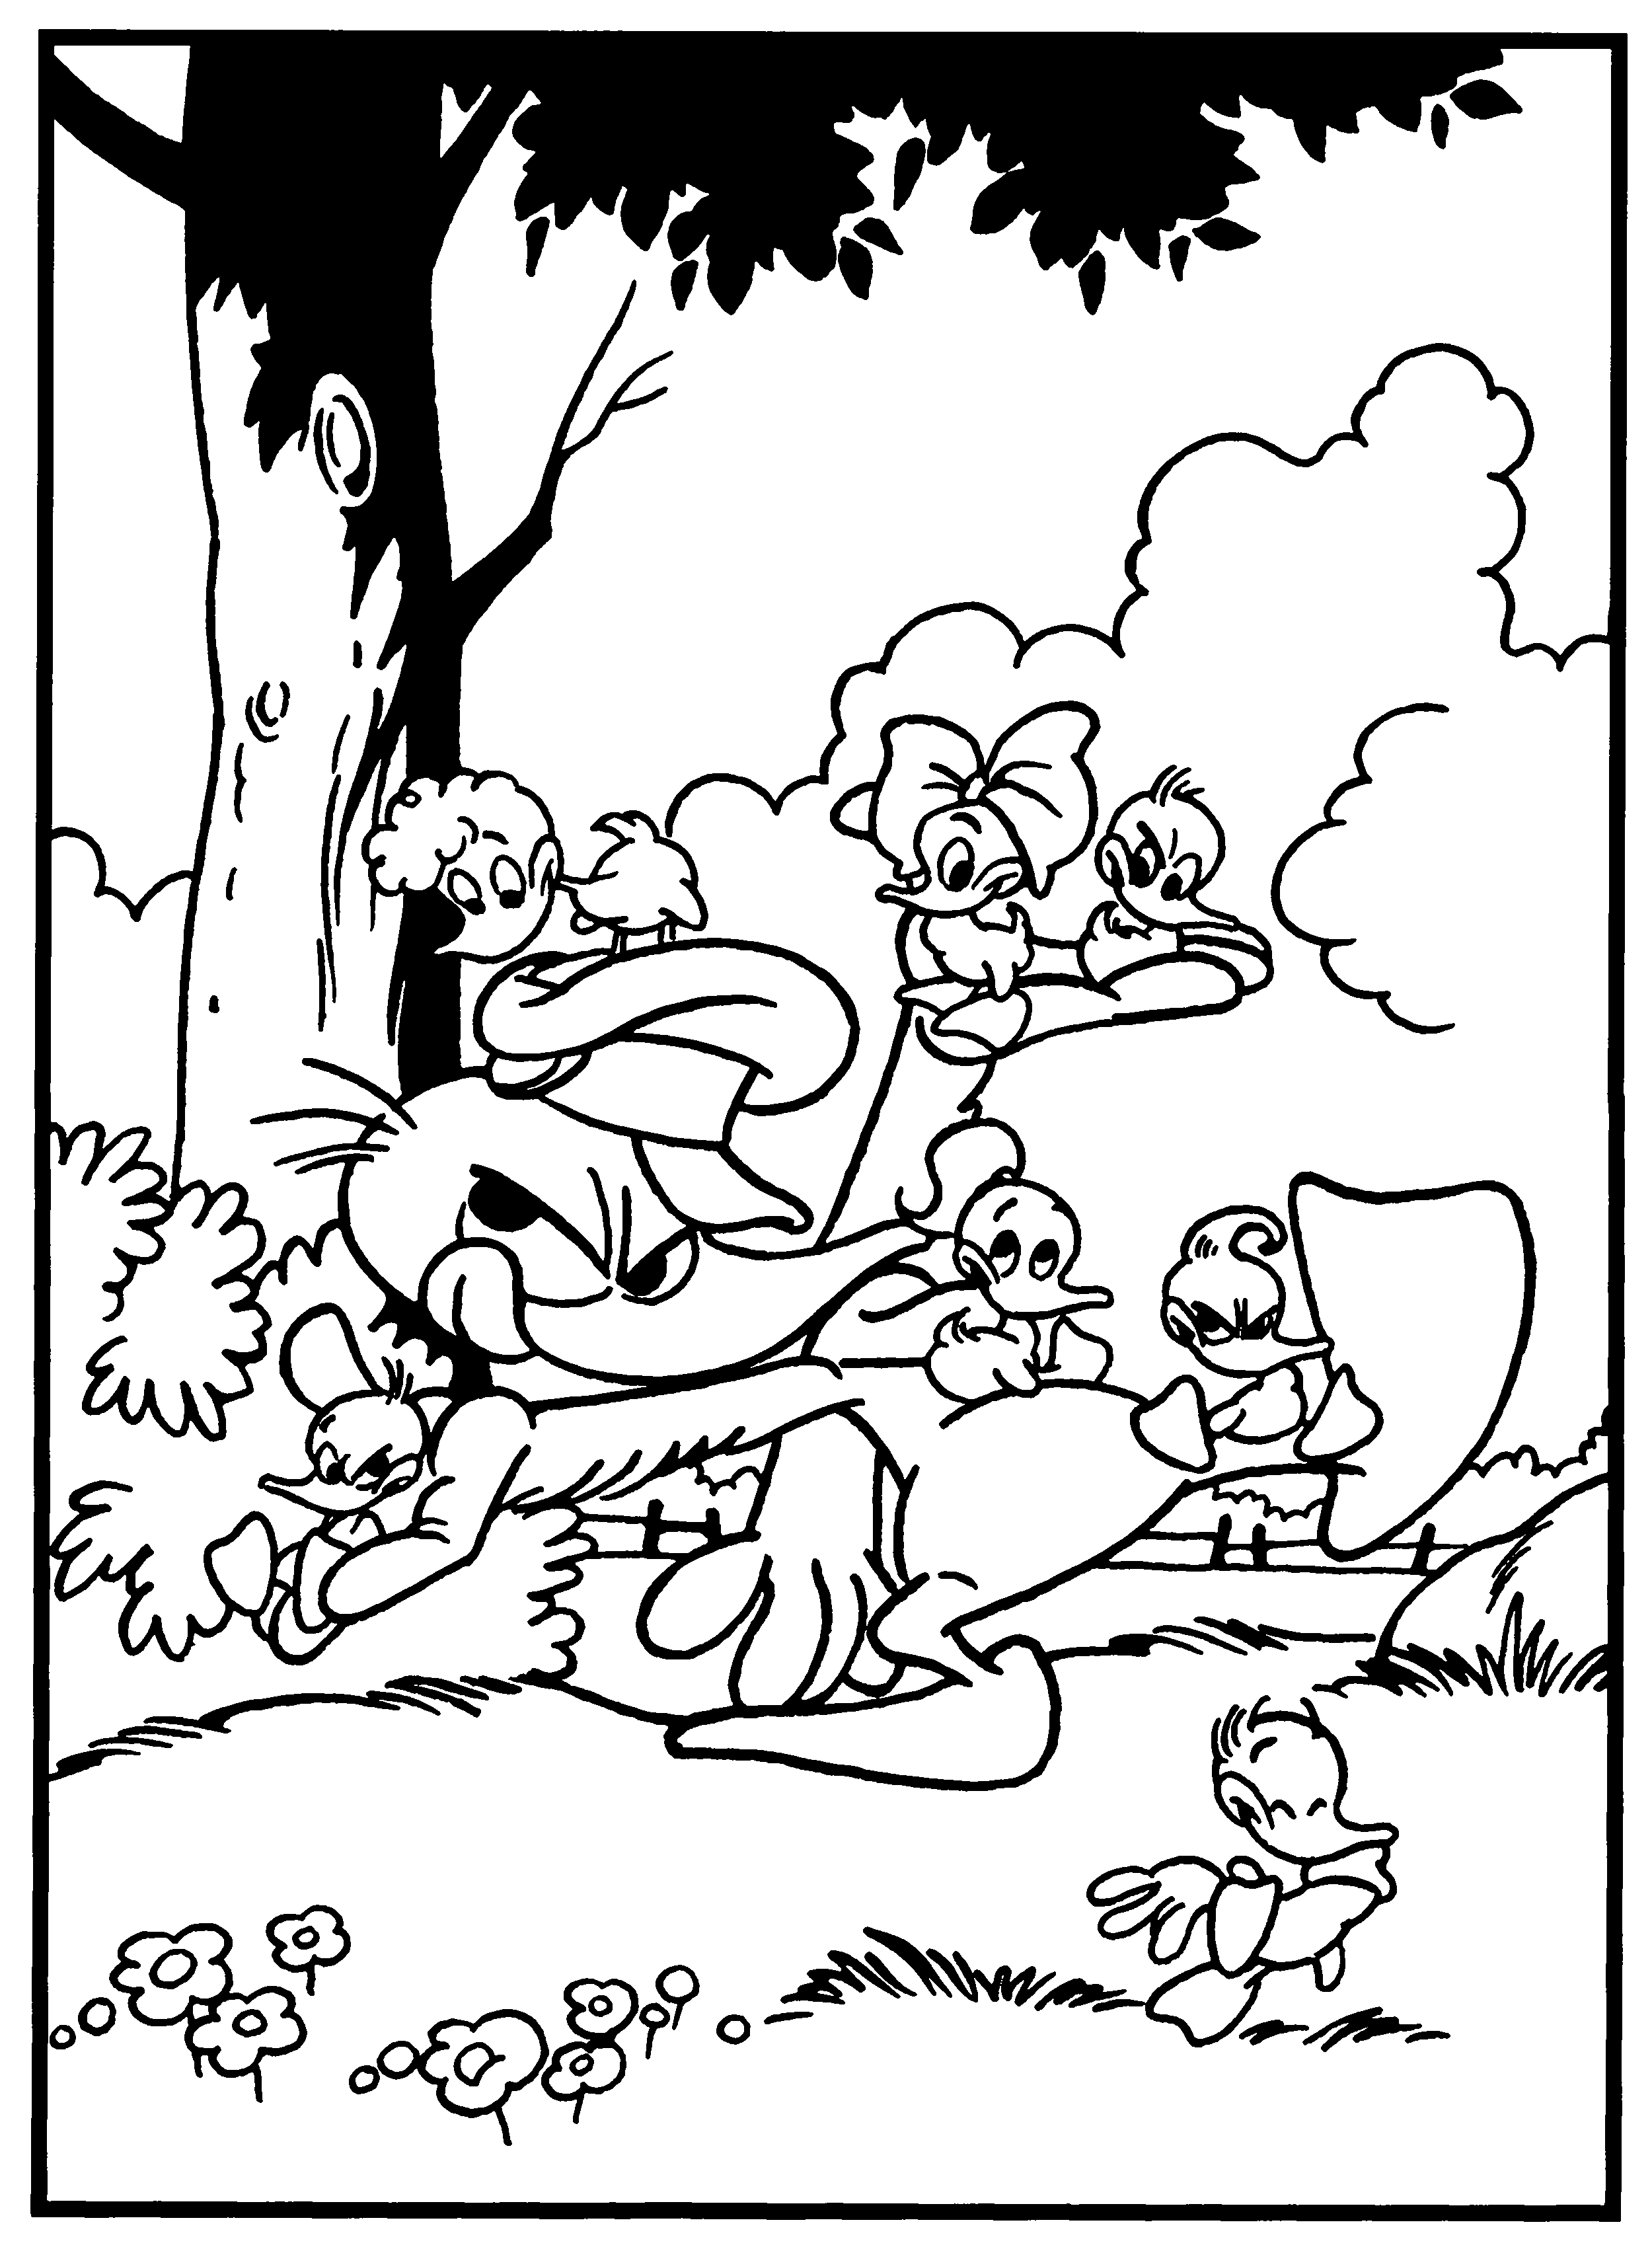 Alfred j kwak Coloring Pages - Coloringpages1001.com